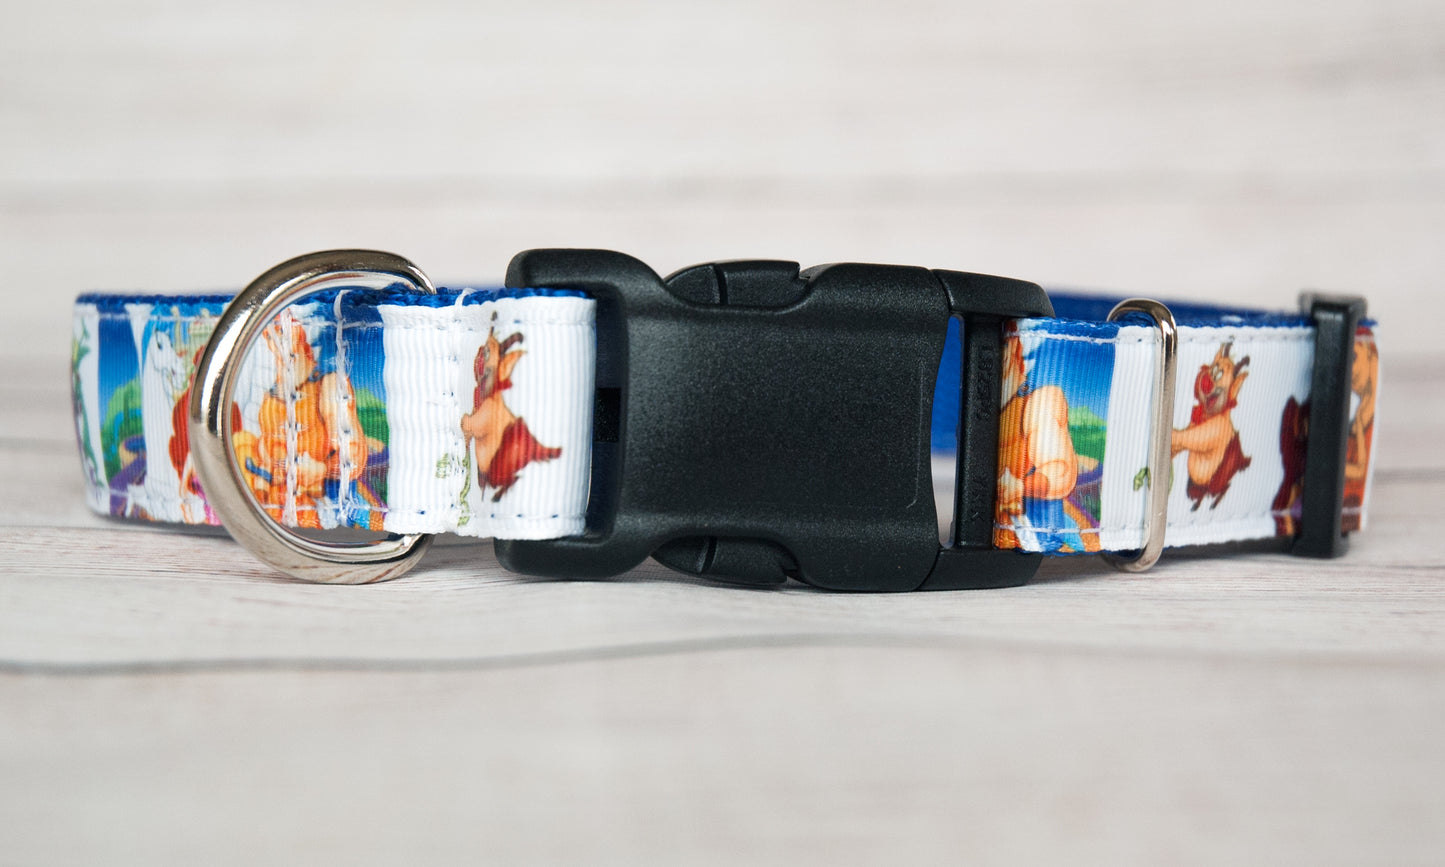 Hercules dog collar and/or leash with Meg, Phil, Pain and Panic.  1 inch wide